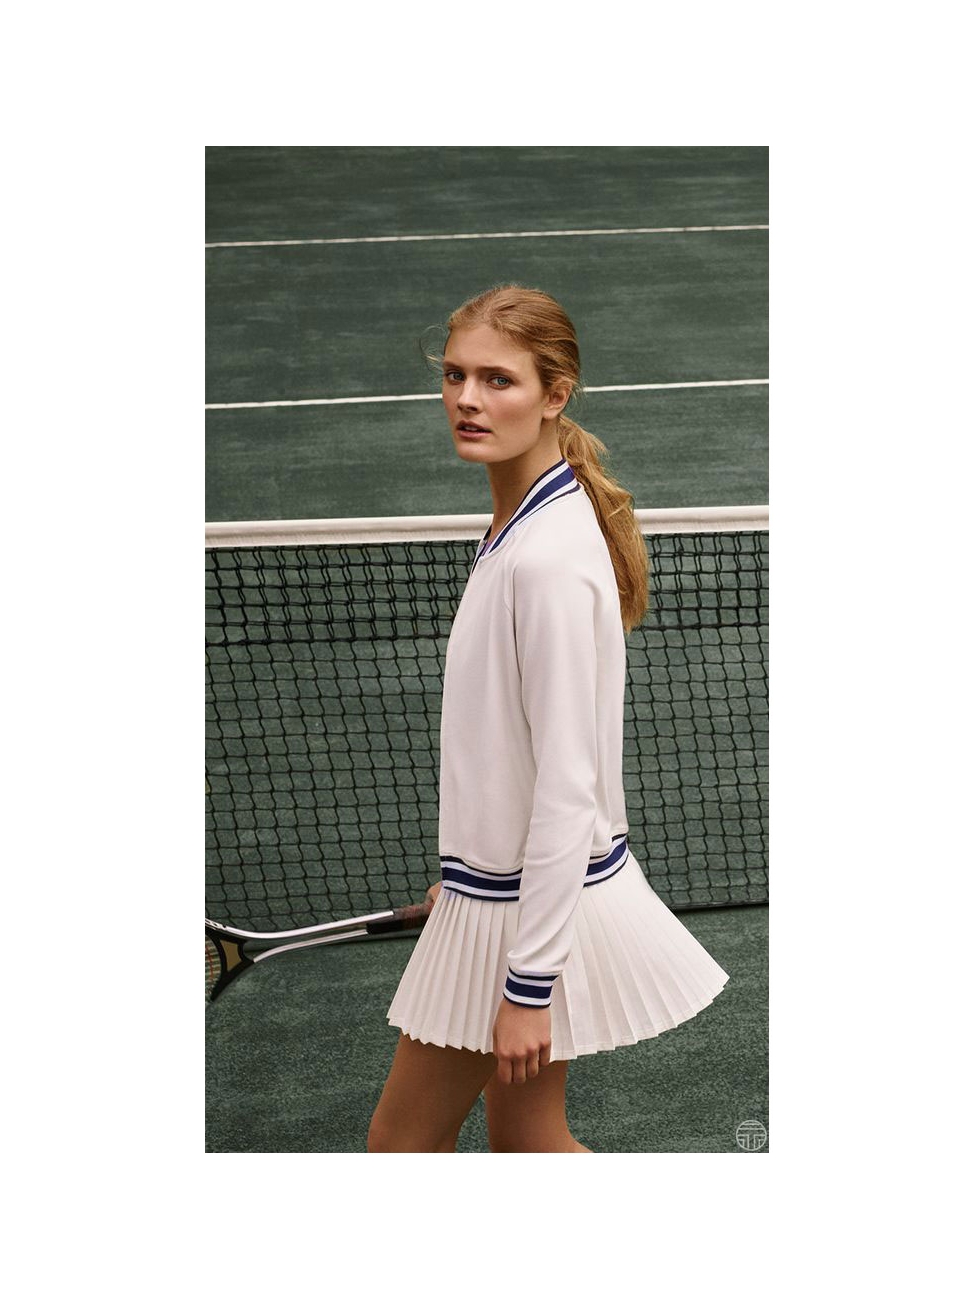 tennis outfit lacoste